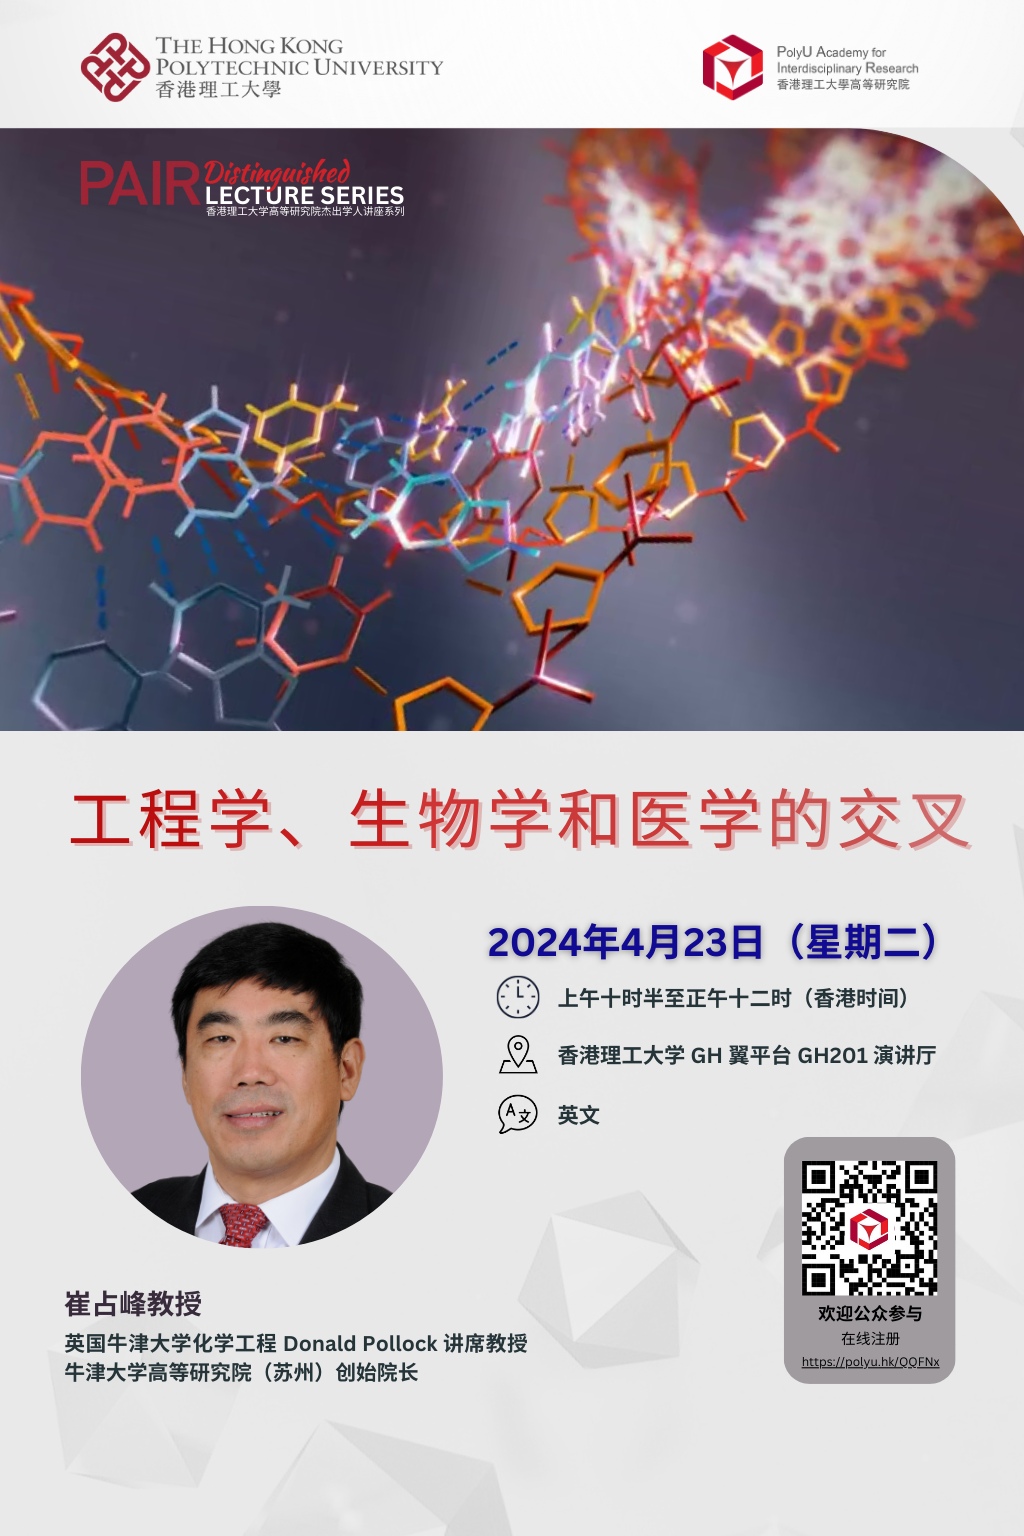 DLS by Prof CUI Zhanfeng on 23 April 20241024 x 1536 pxSC